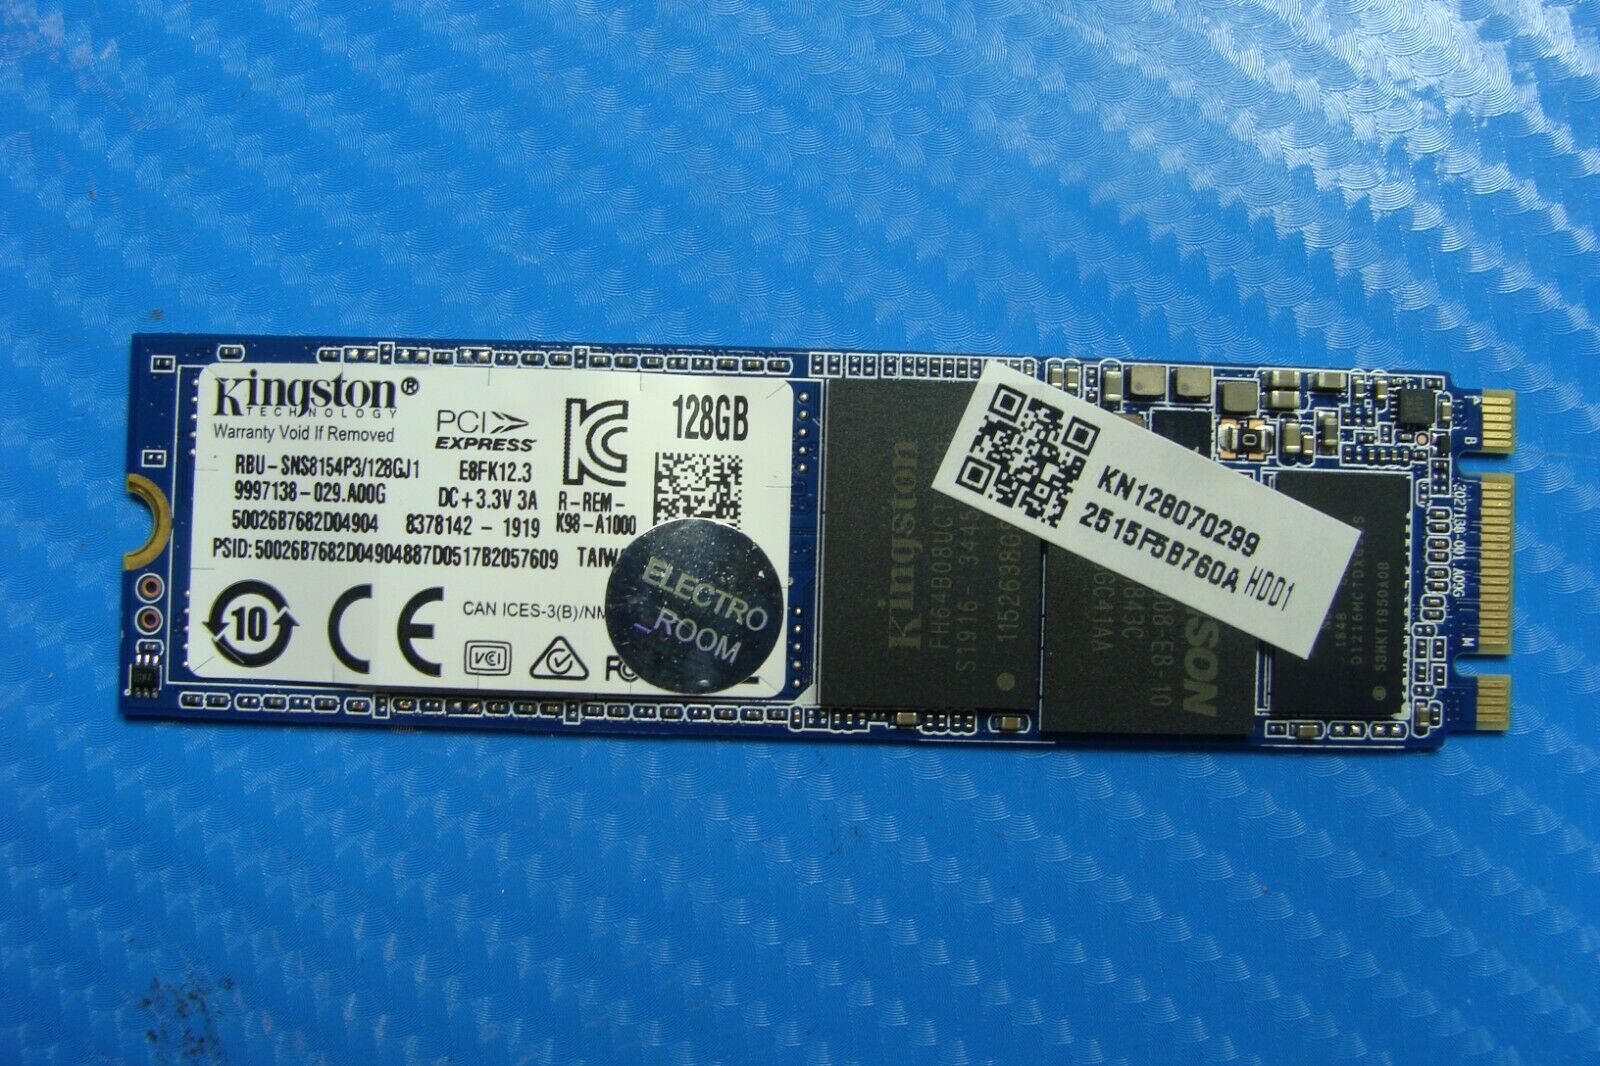 Acer A515-54-30BQ Kingston 128GB PCIe M.2 SSD Solid State Drive sns8154p3/128gj1 Tested Laptop Parts - Replacement Parts for Repairs